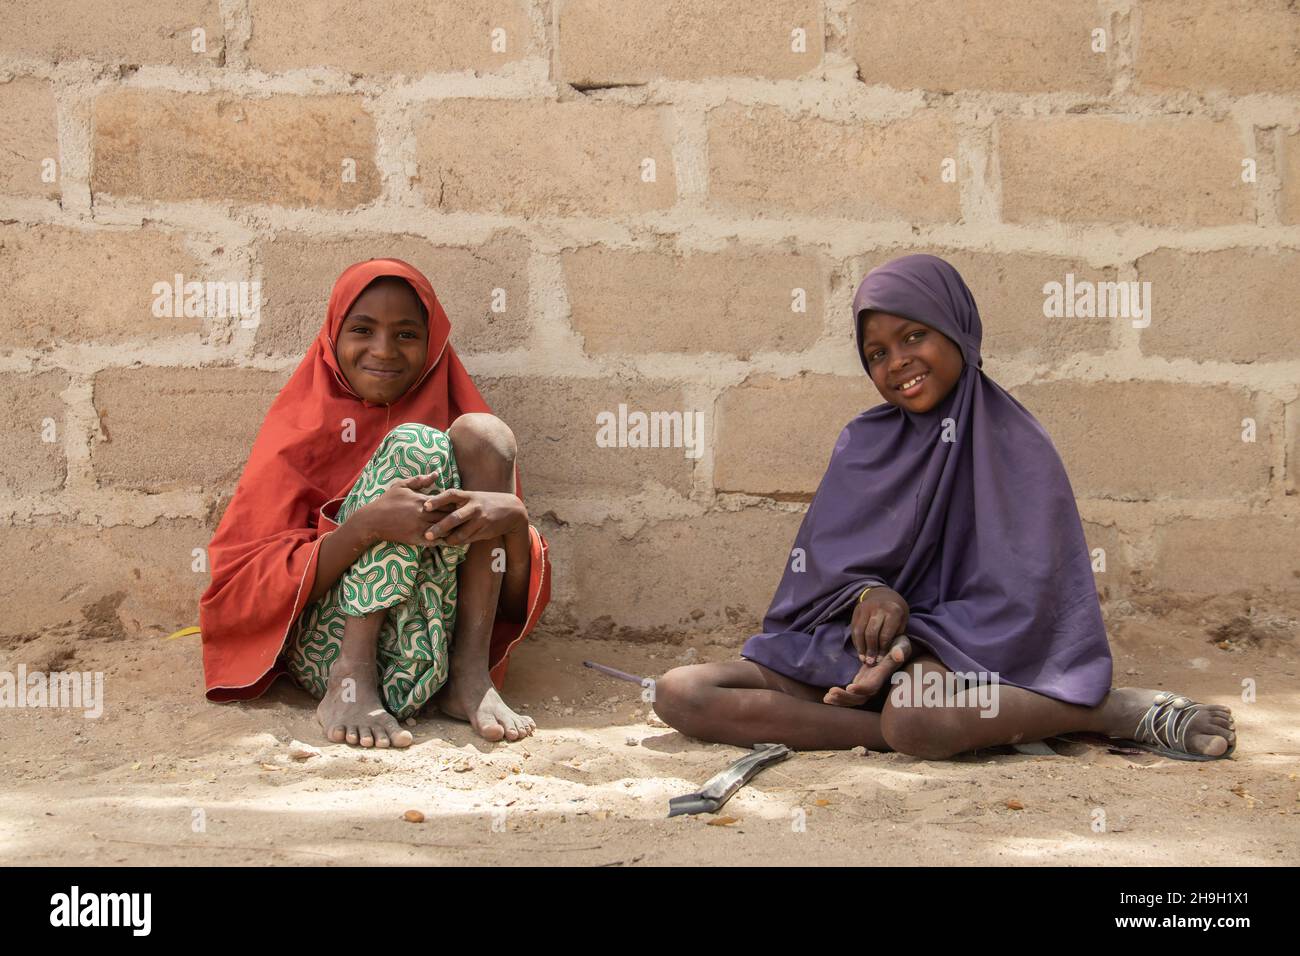 Two sisters dressed in traditional colorful wardrobe seating at the ground, Nigeria, Maiduguri Stock Photo